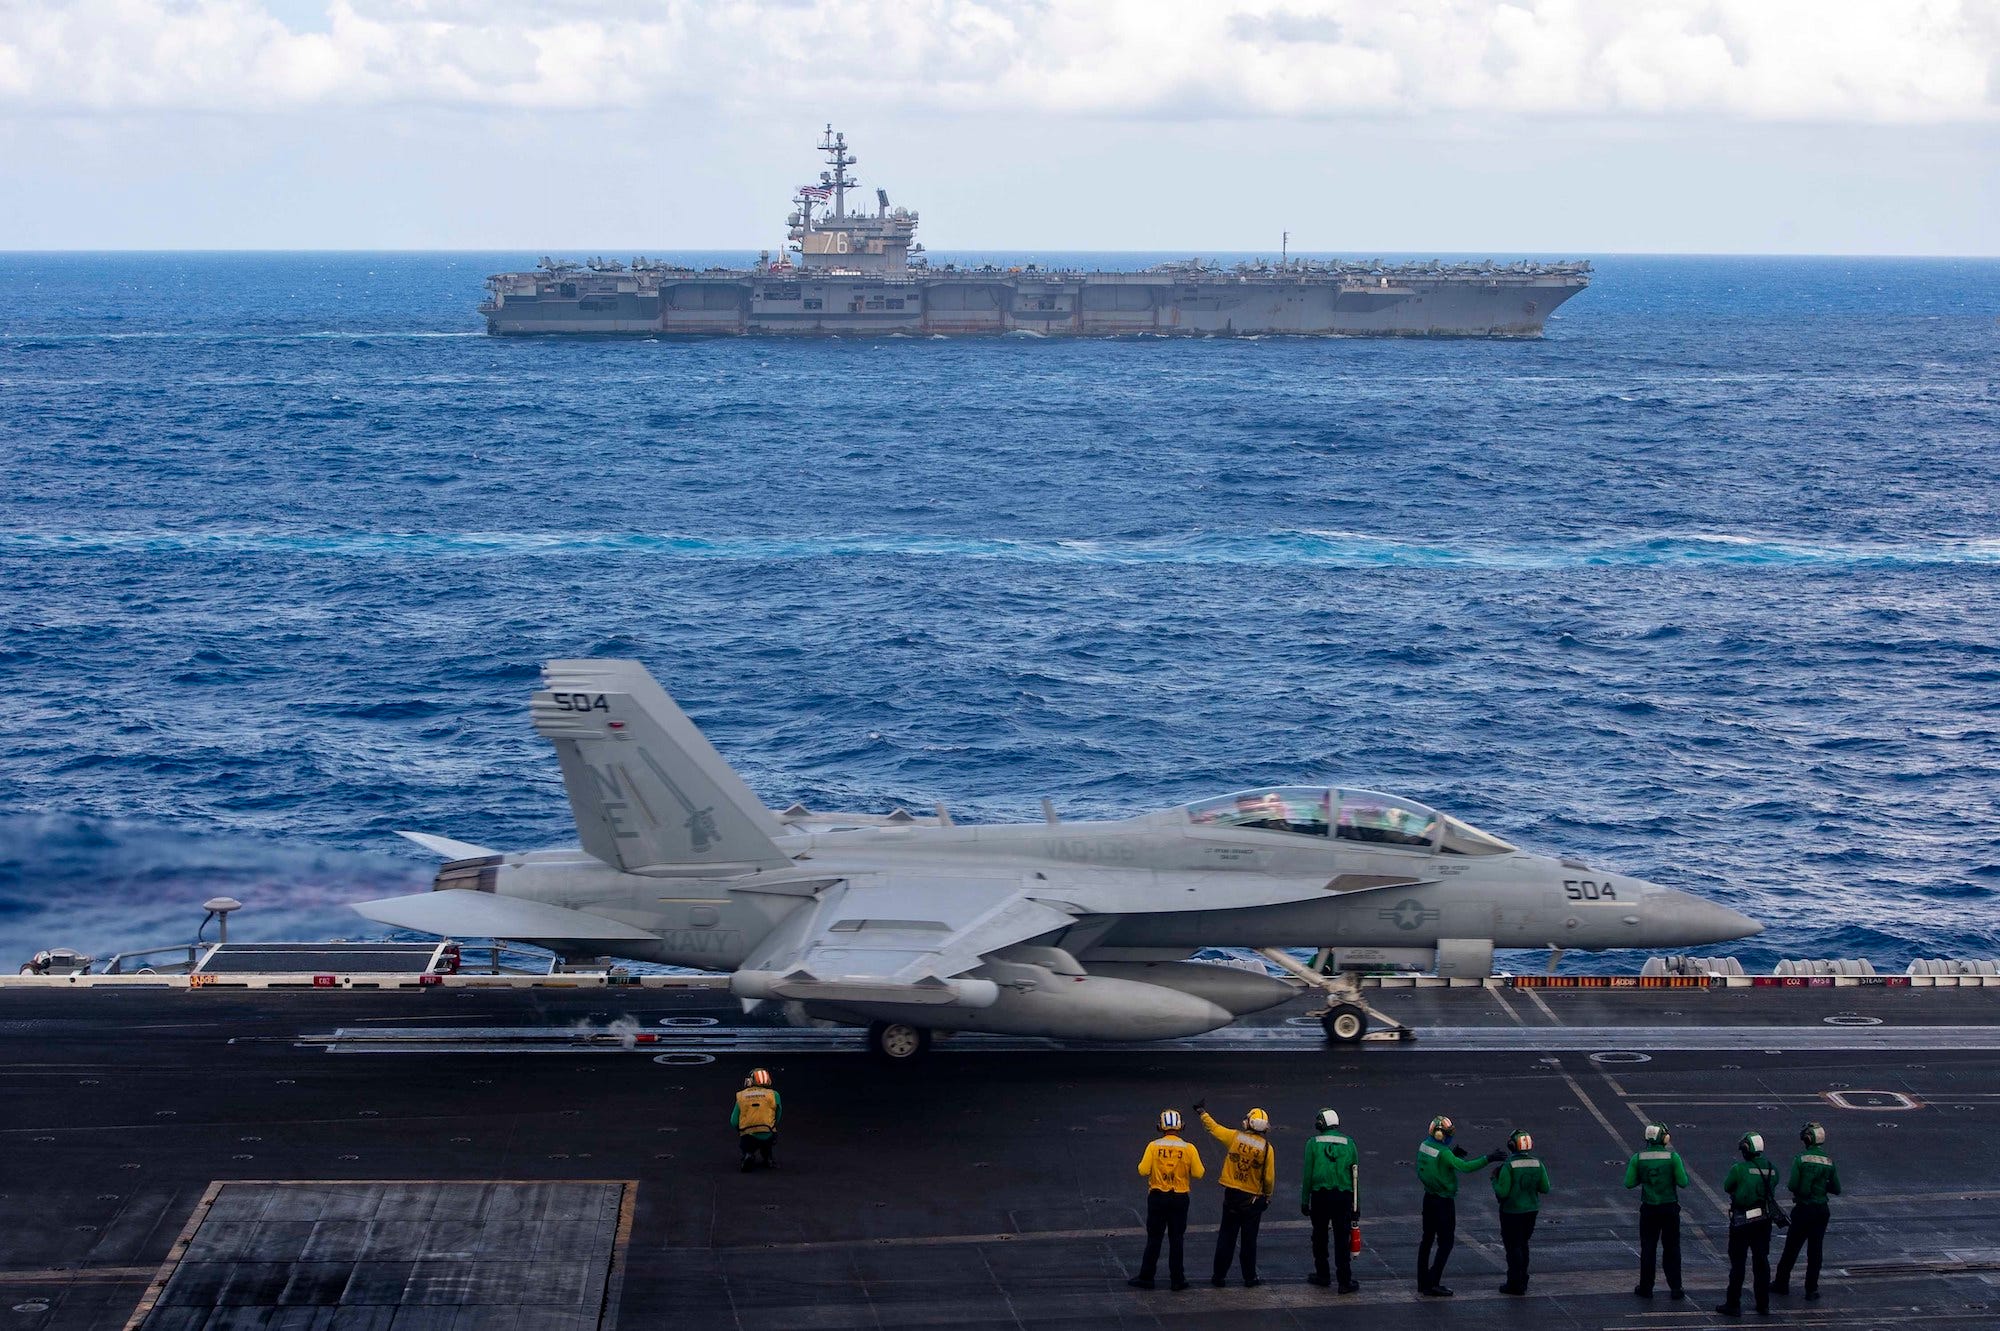 EA-18G Growler takes off from US Navy aircraft carrier Carl Vinson